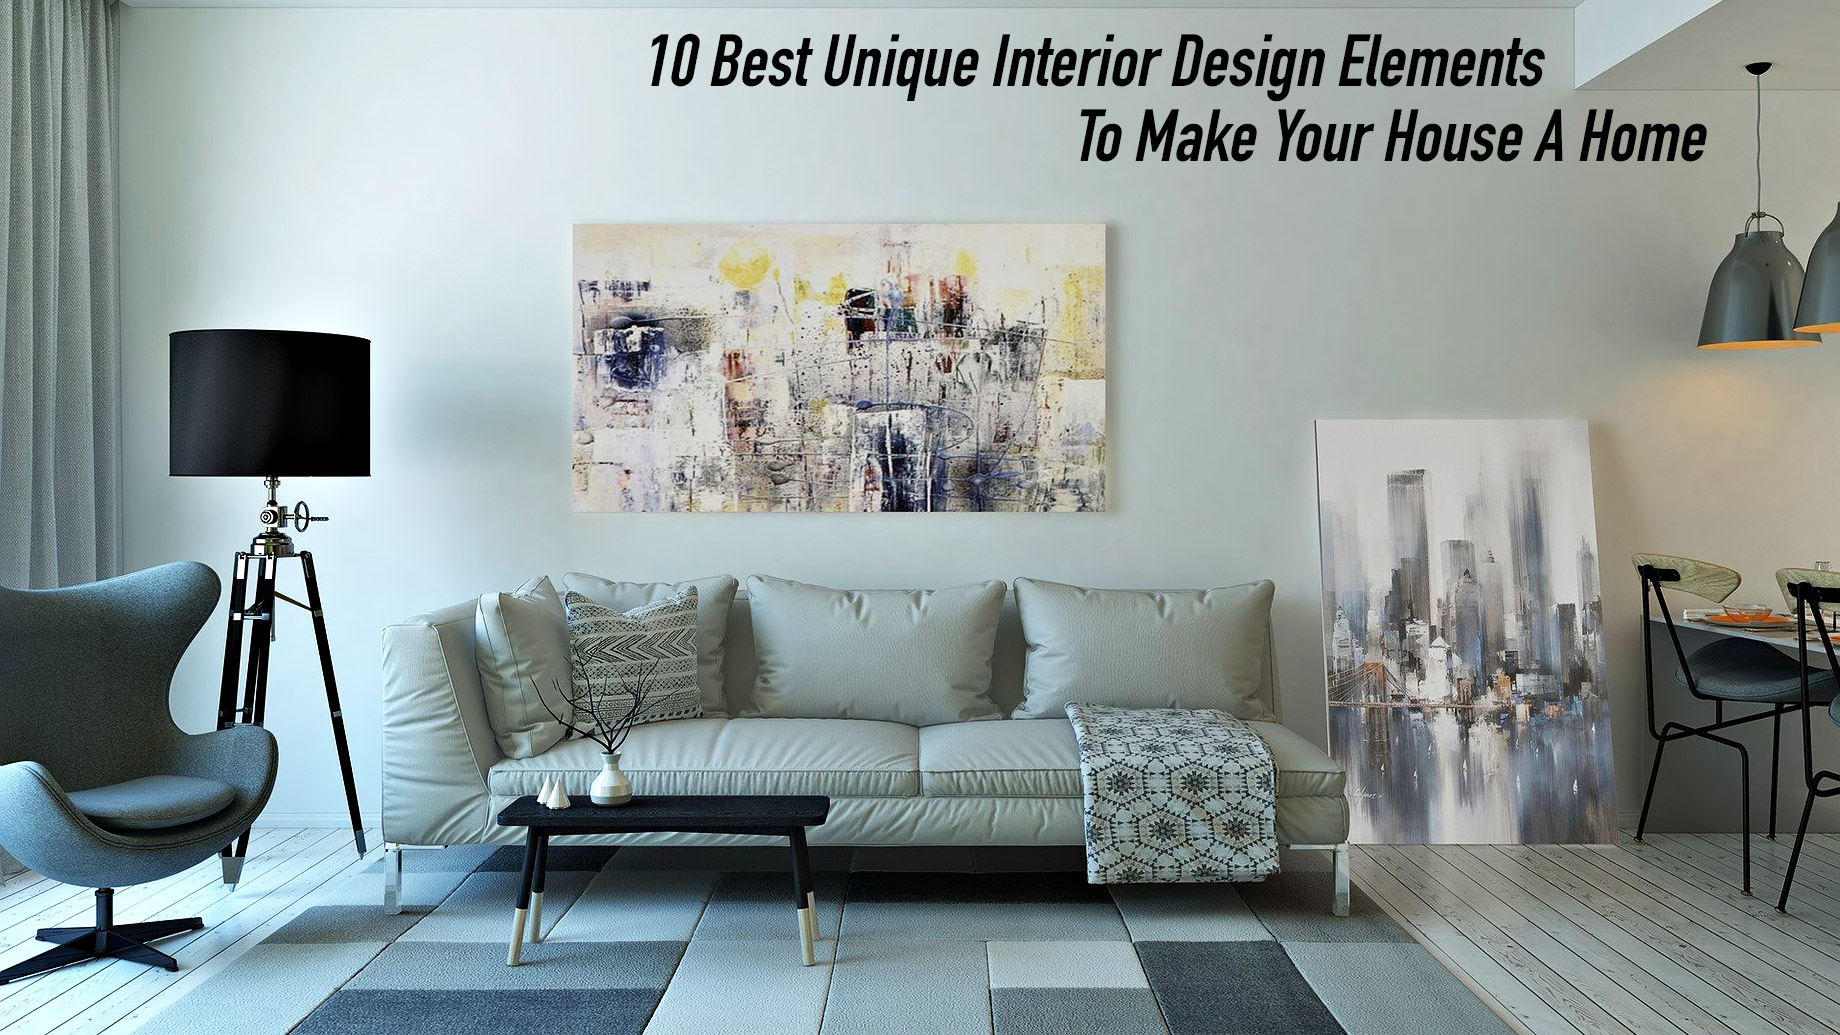 10 Best Unique Interior Design Elements To Make Your House A Home